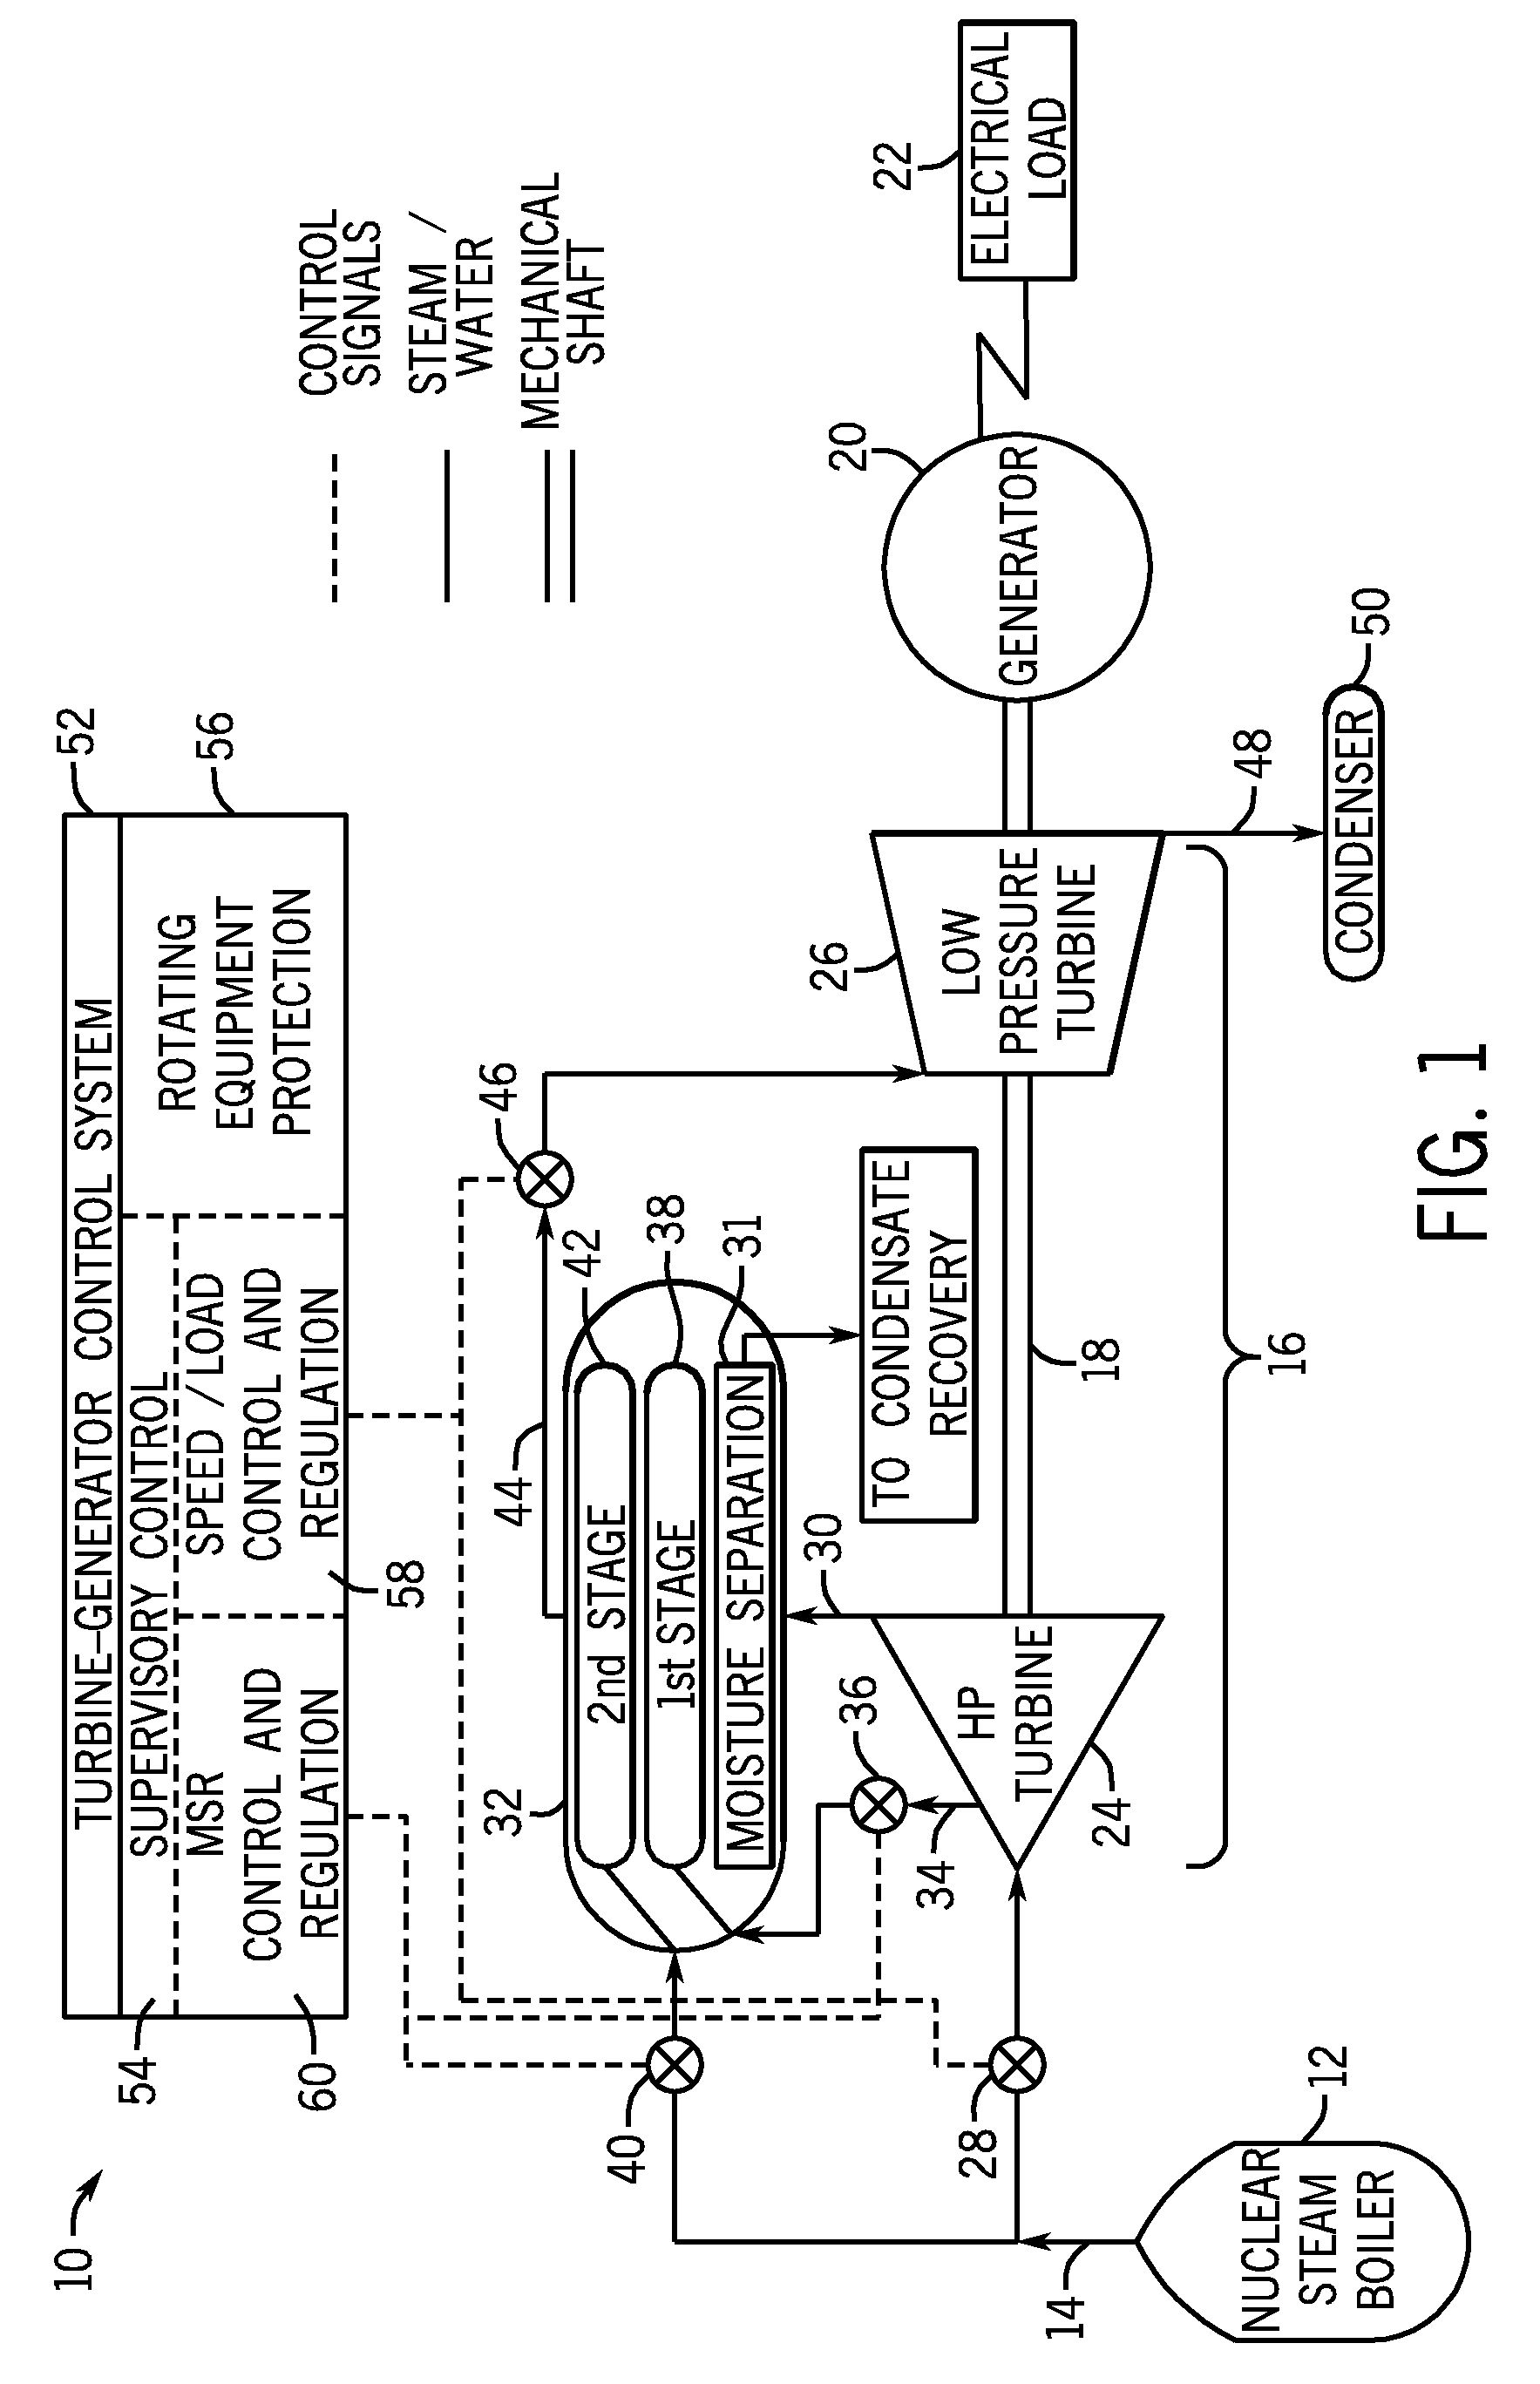 Method and apparatus for controlling moisture separator reheaters